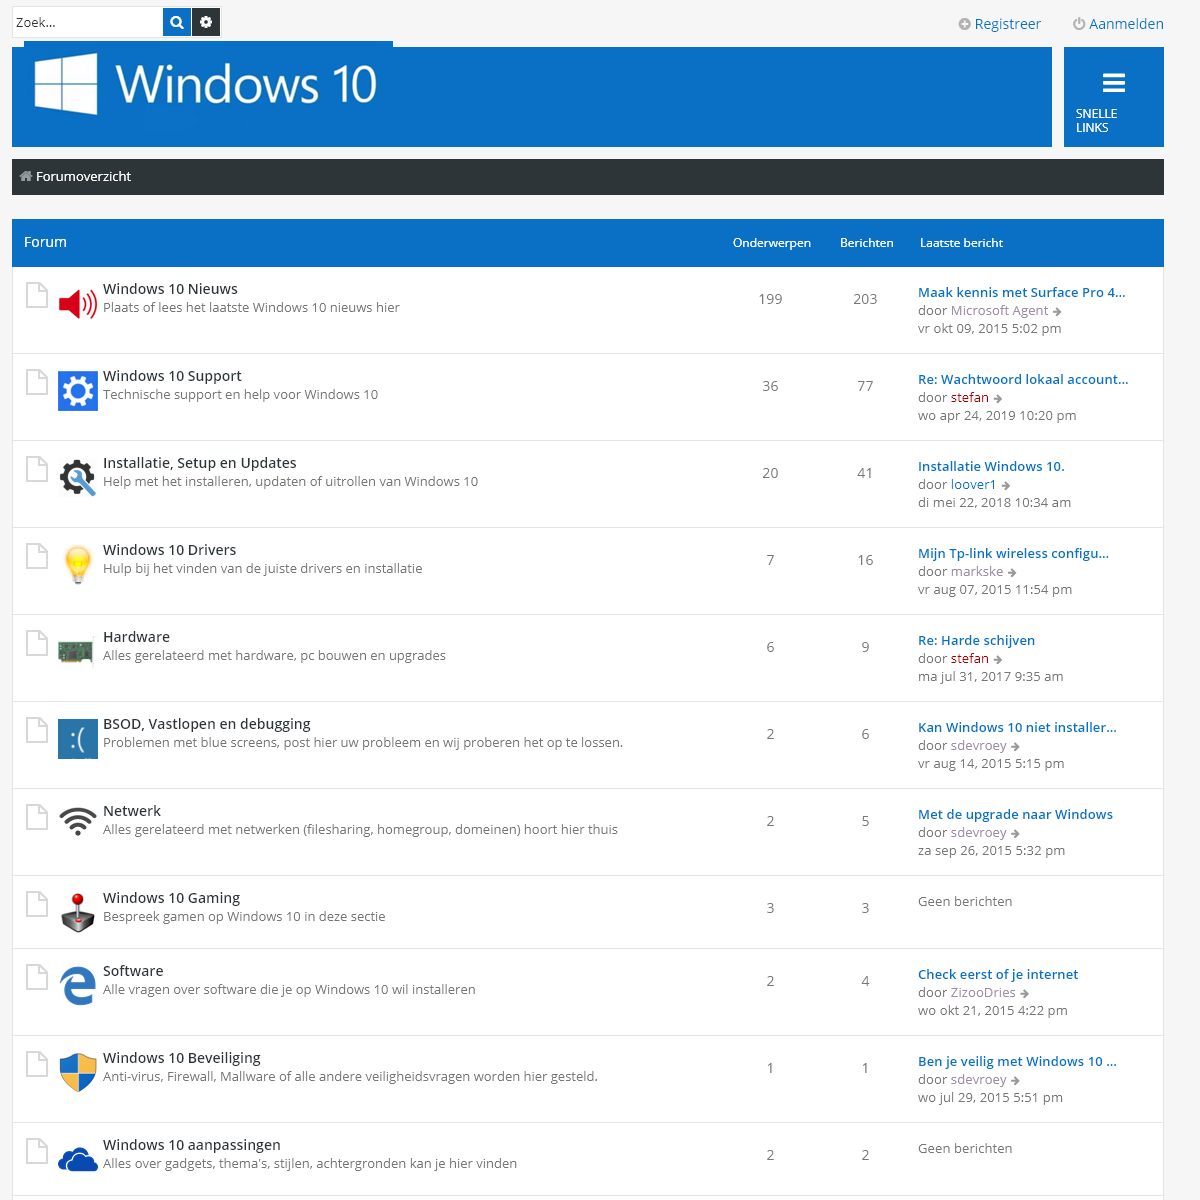 A complete backup of windows10forum.be